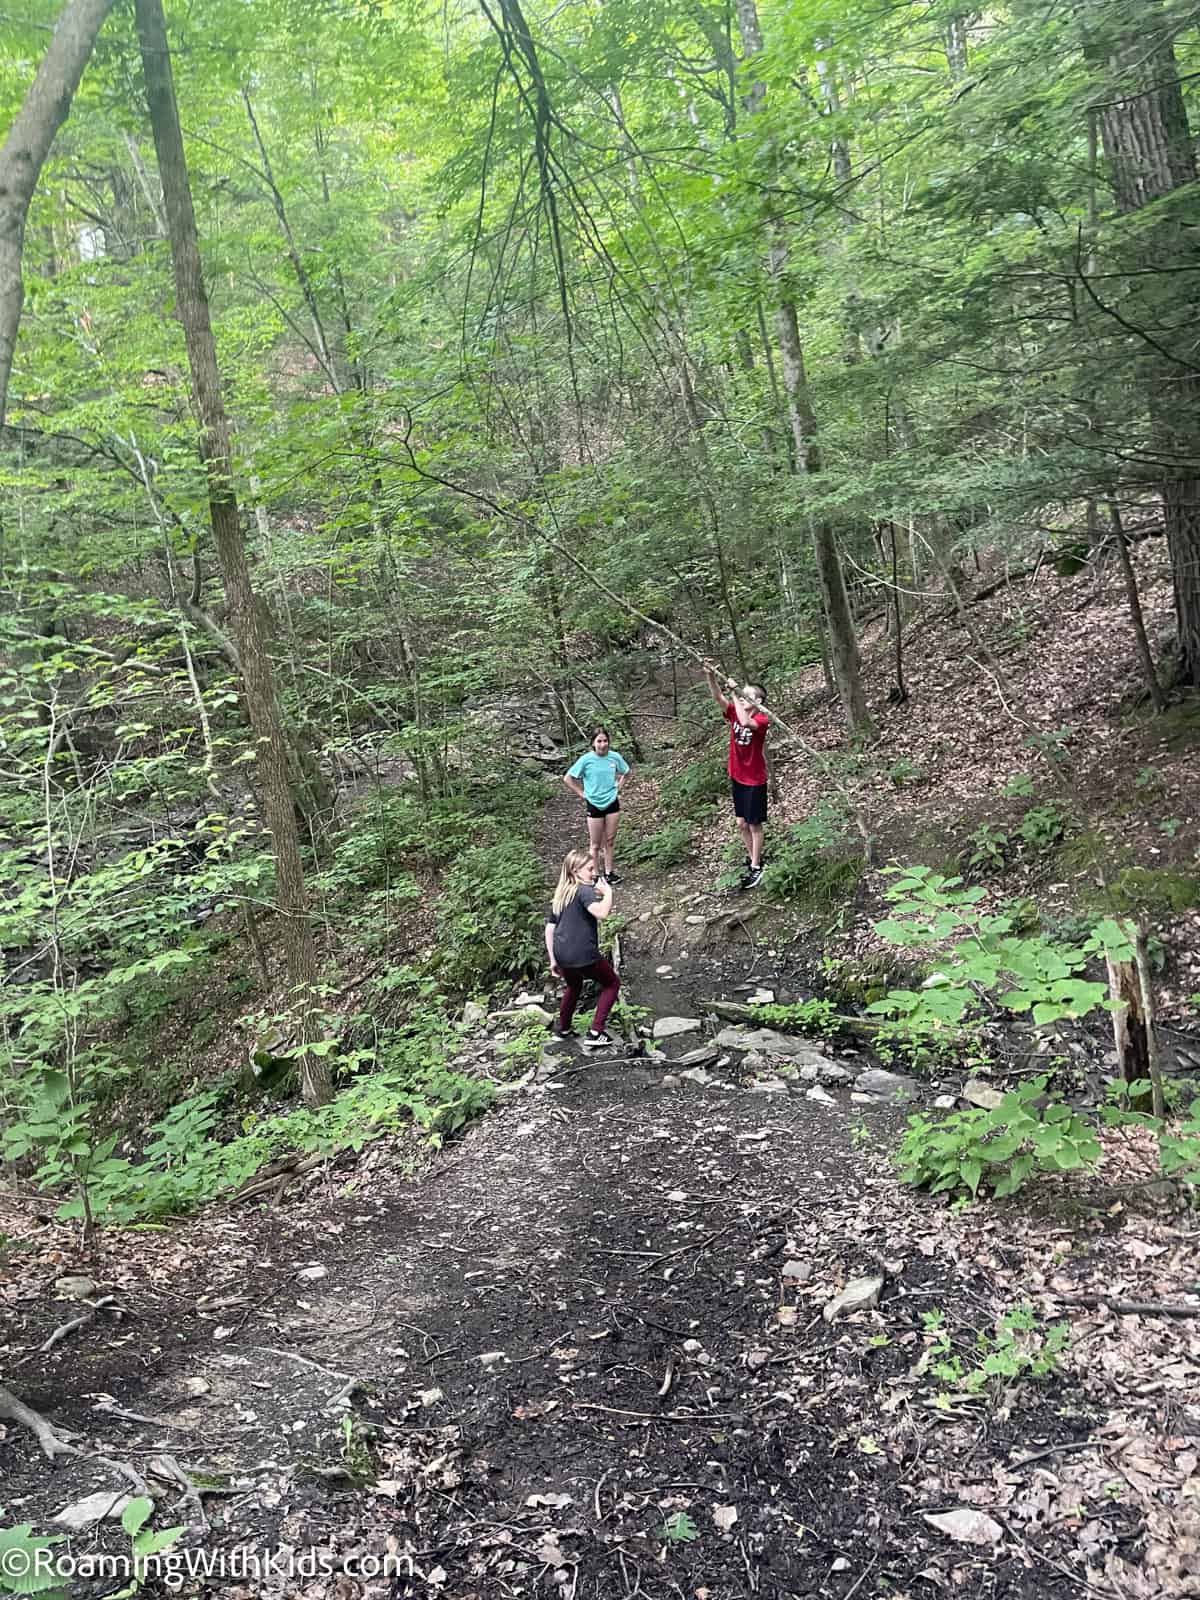 hiking the trails - Things to do in Schenectady New York with Kids